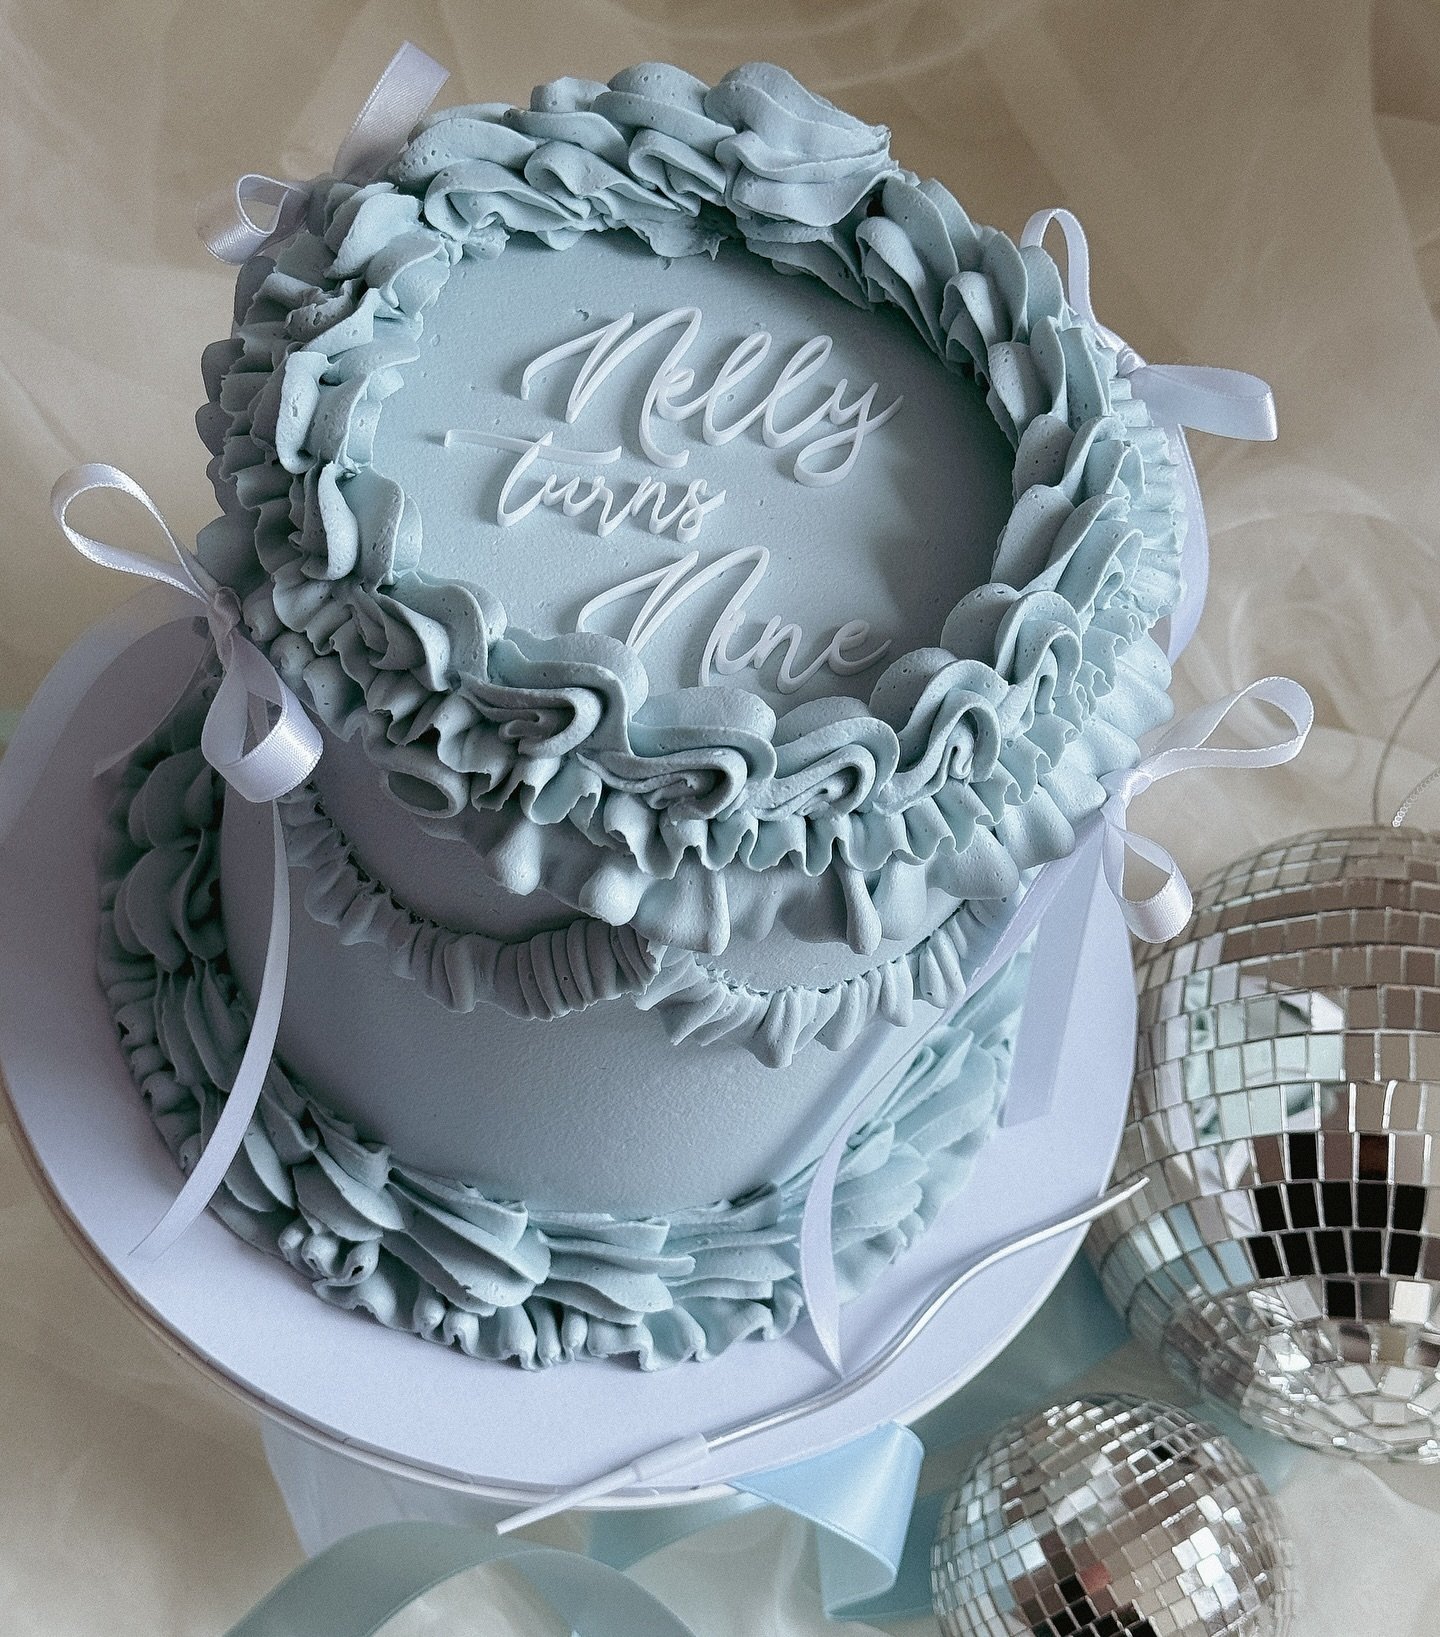 Buttercream ruffles and bows for Nelly.

Acrylic name charm @burntisland_occasions 

#9thbirthday #bluecake #rufflecake #bowcake #vintagecake #bows #birthdaycake #blue #buttercream #pipingtechniques #lambethcake #weekend #sunday #weddingcake #southwa